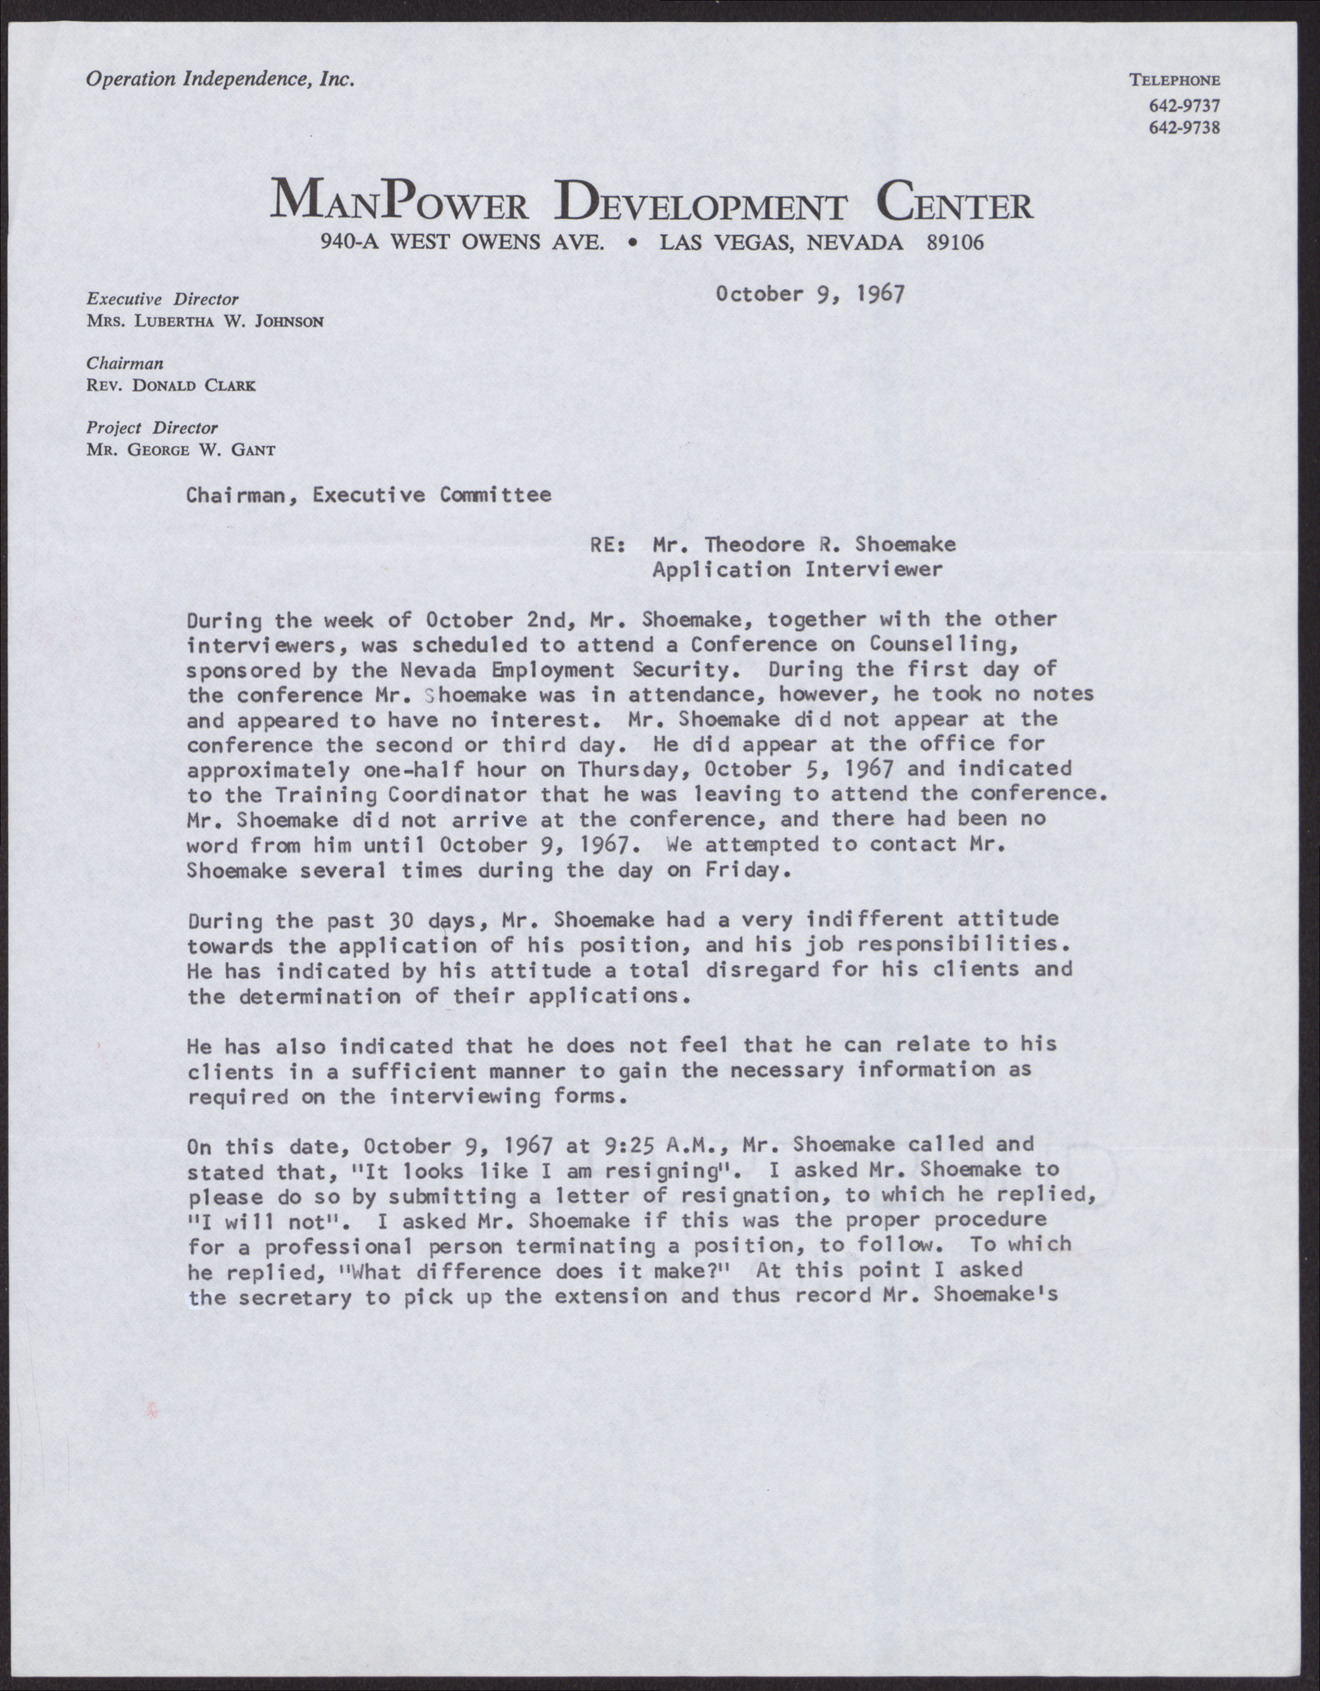 Letter regarding Mr. Theodore R. Shoemake from George W. Gant (2 pages), October 9, 1967